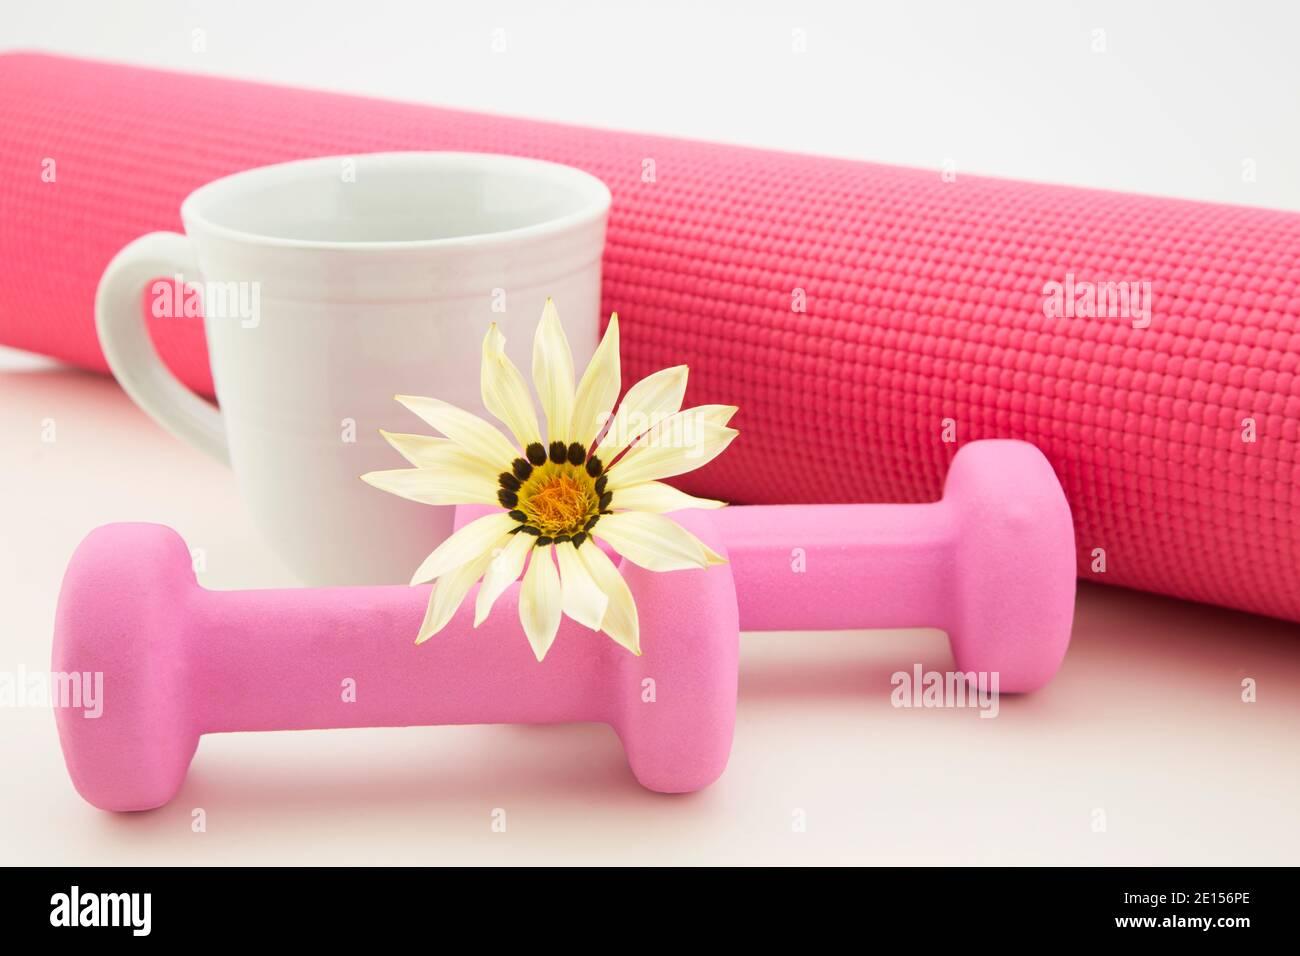 Home fitness portrayed in feminine pink and white hues of yoga mat, mug, flower, and light weights Stock Photo